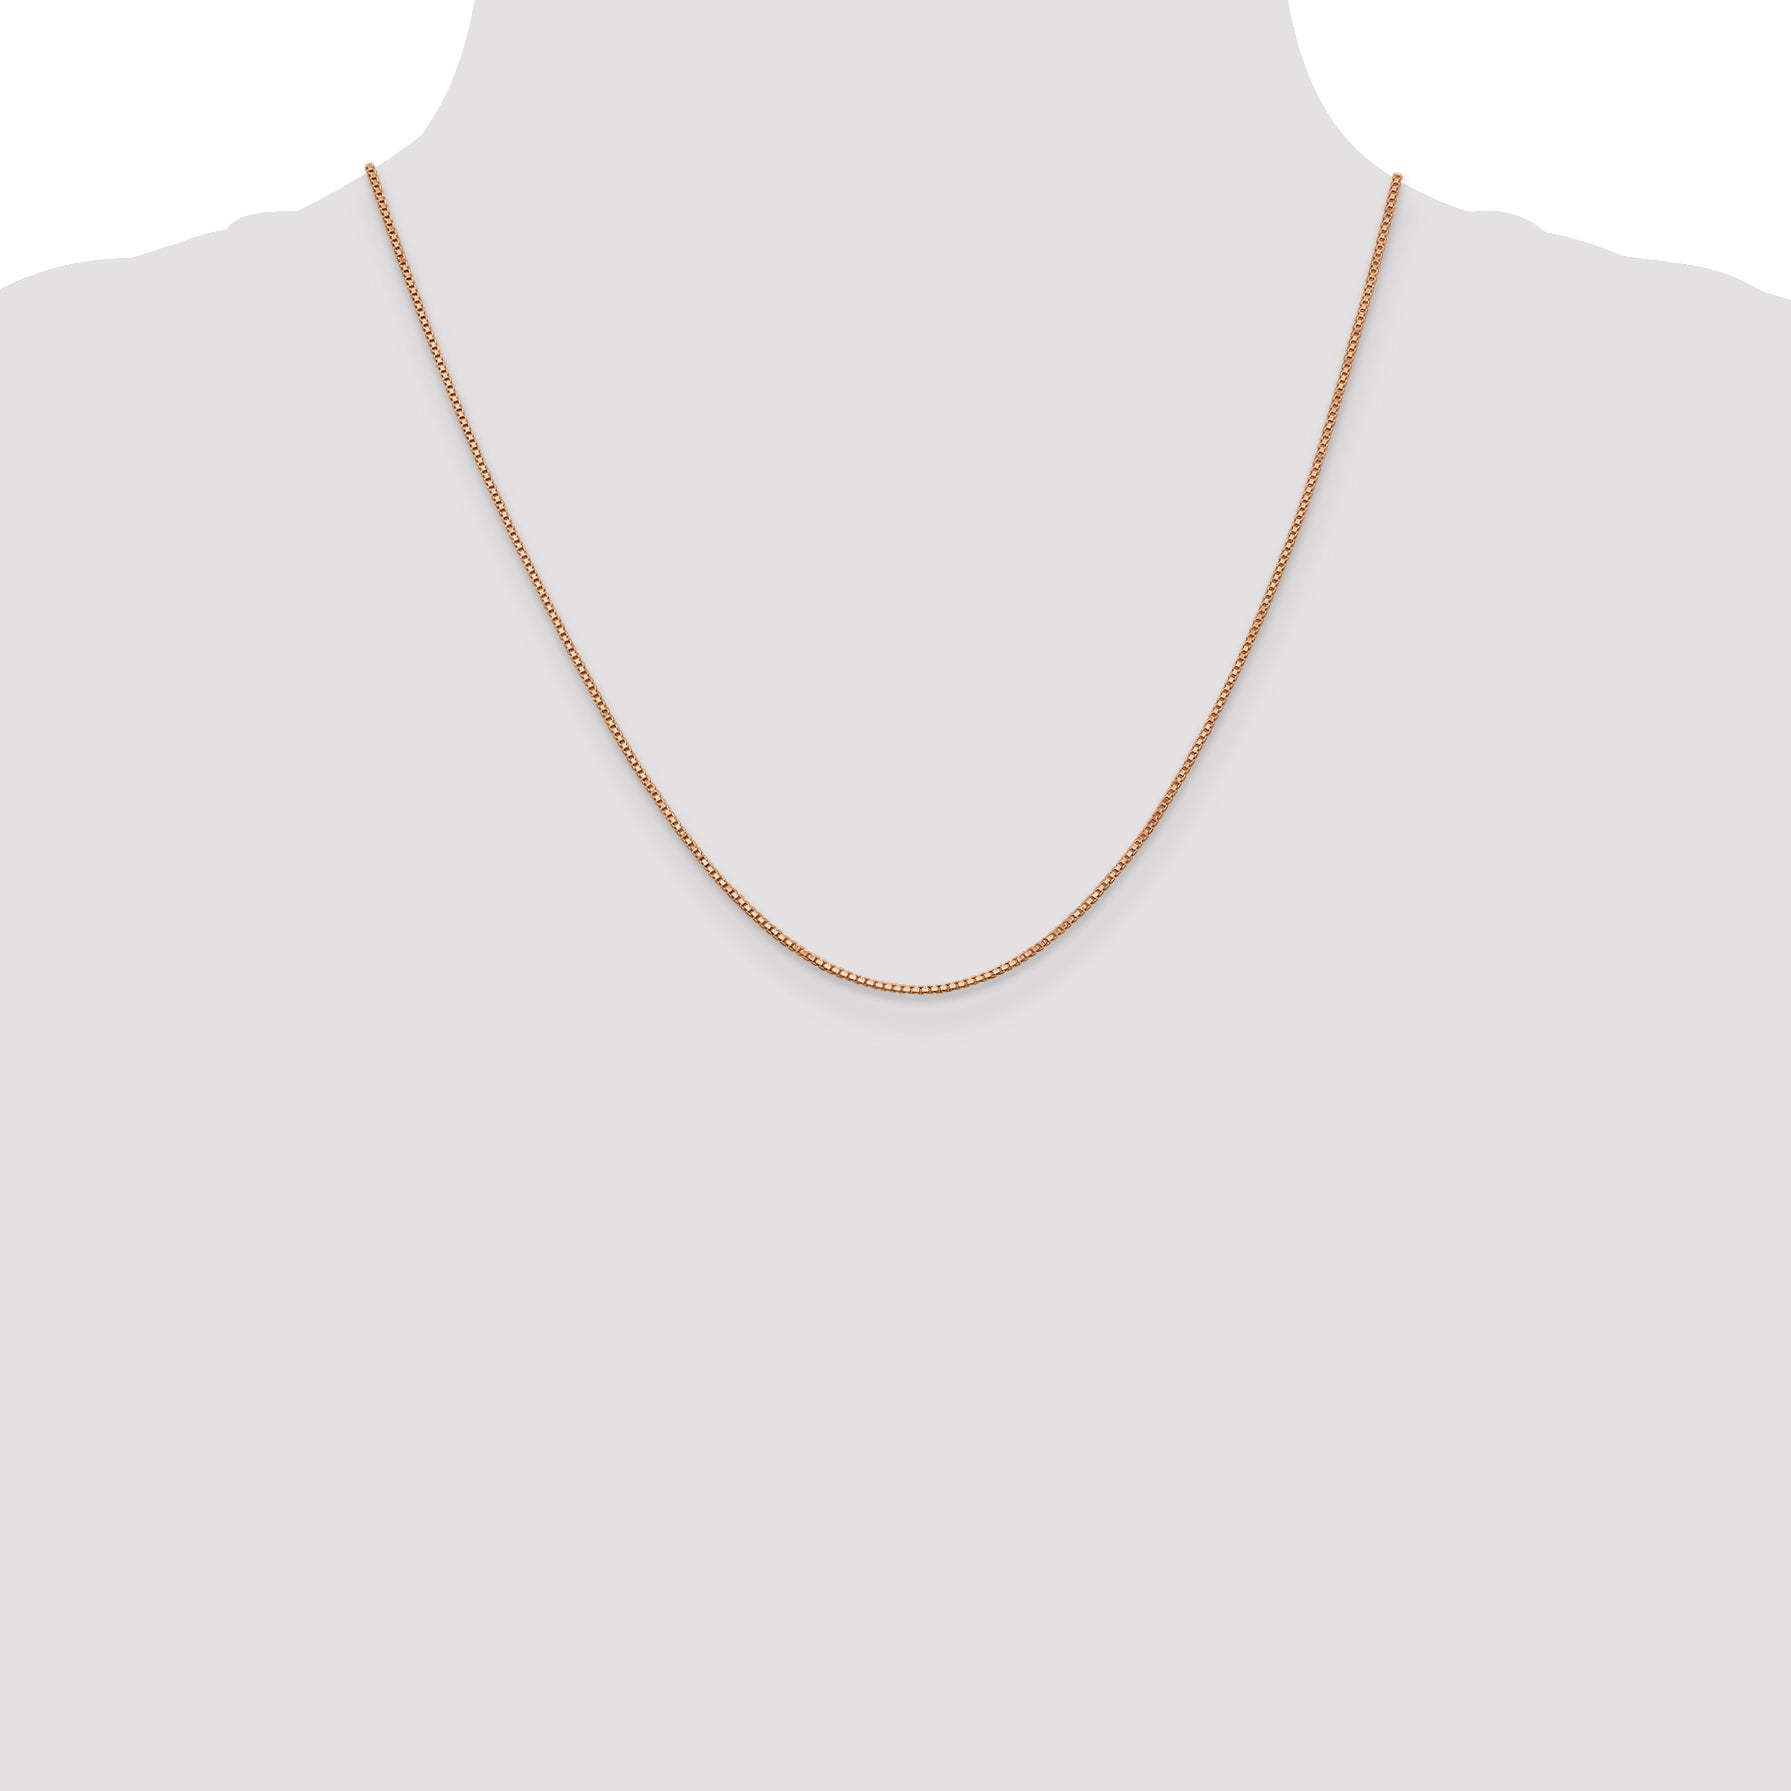 14K Rose Gold 16 inch 1mm Box Link with Lobster Clasp Chain